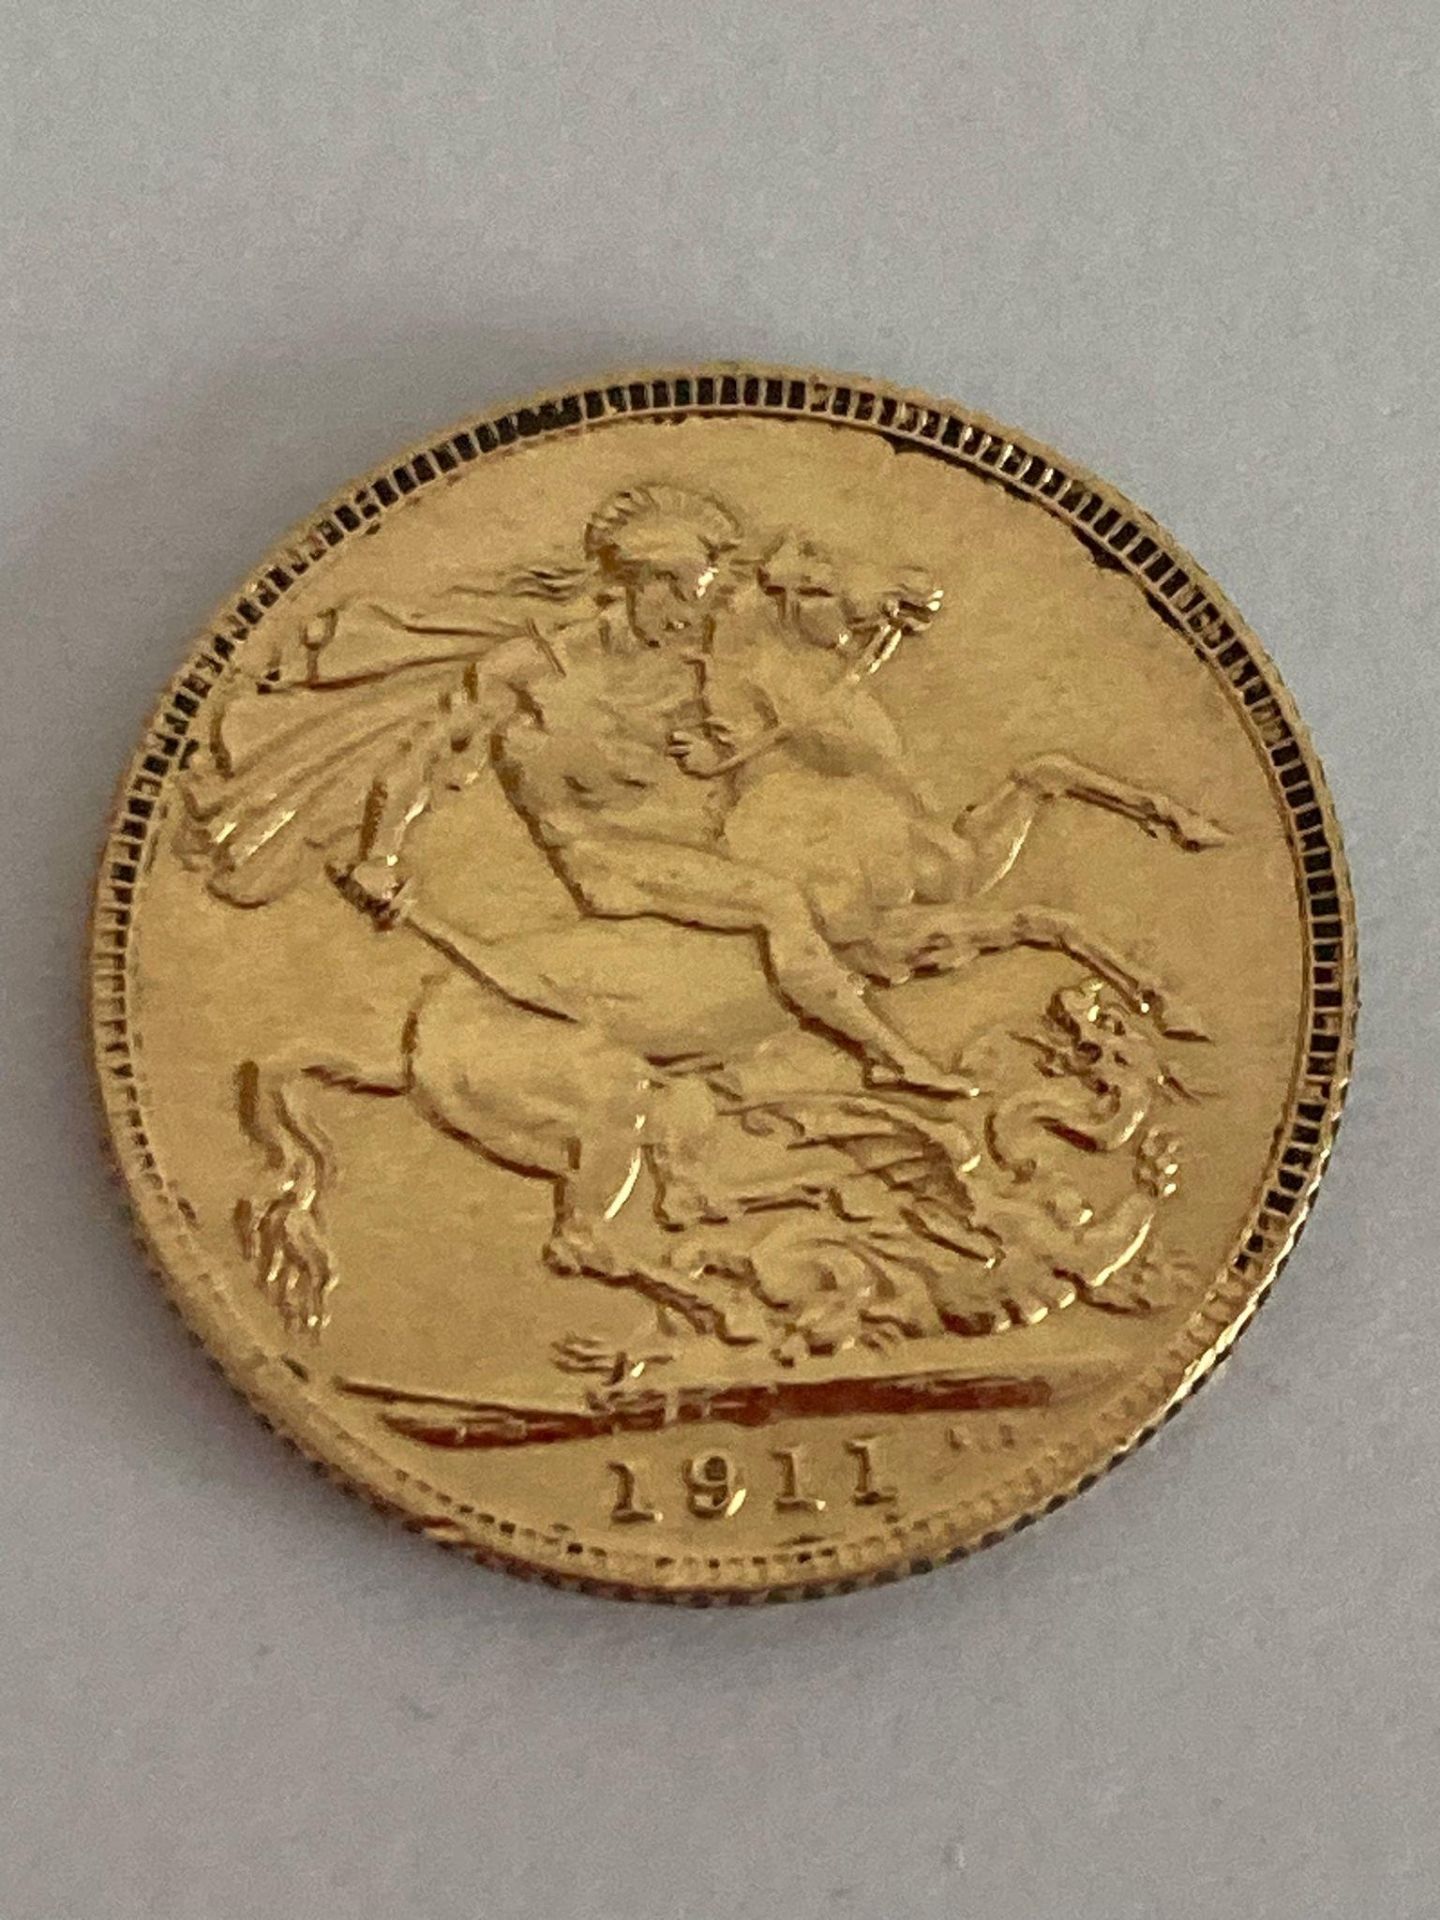 GOLD SOVEREIGN 1911 in very fine condition. Full size Sovereign. London mint.